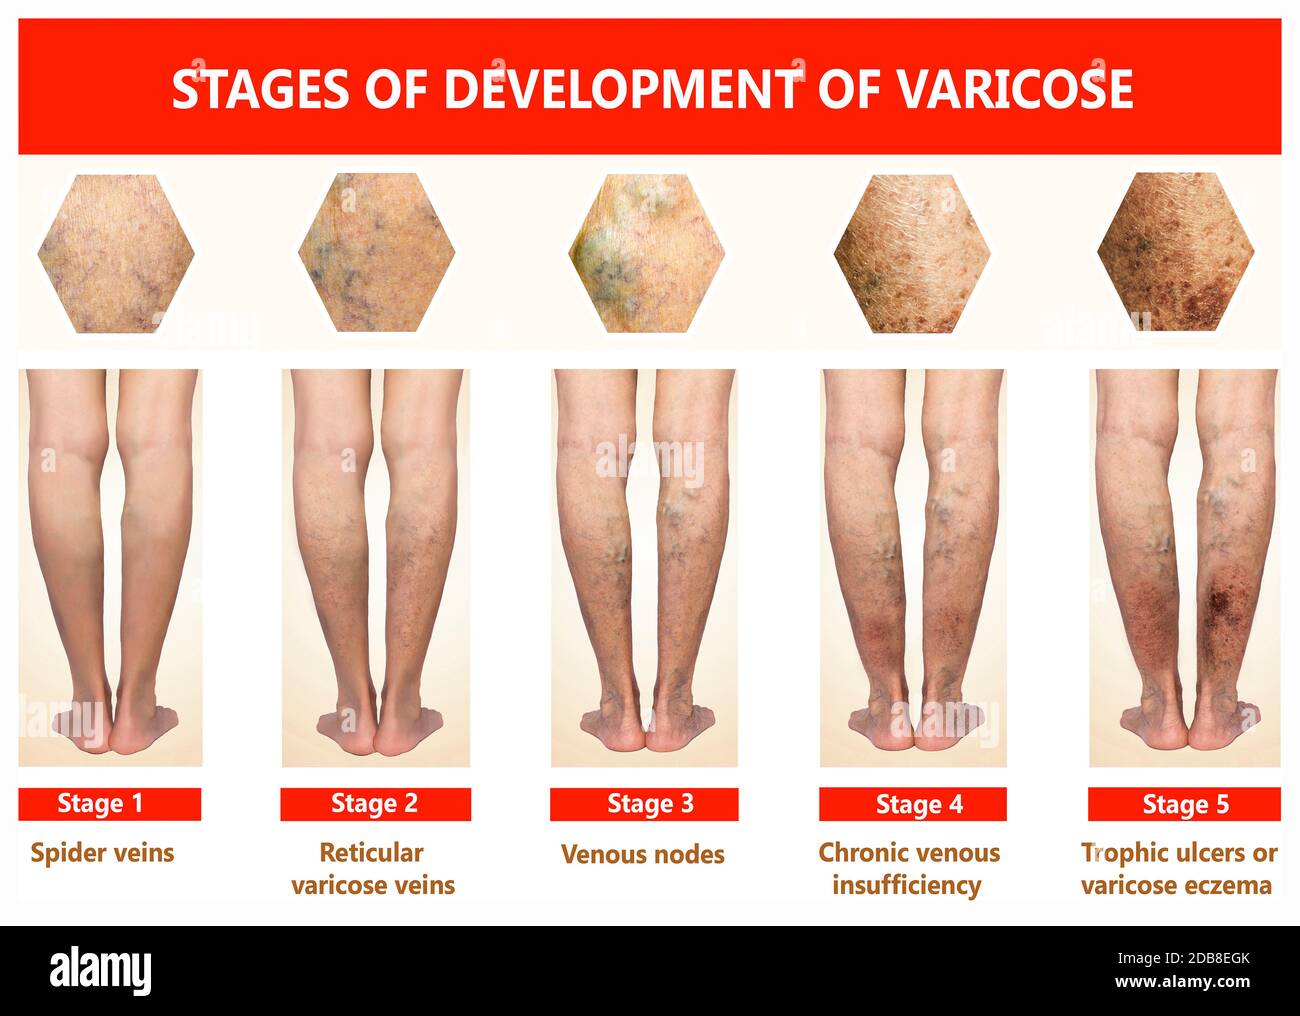 https://c8.alamy.com/comp/2DB8EGK/varicose-veins-on-a-female-senior-legs-the-stages-of-varicose-veins-the-old-age-and-sick-of-a-woman-varicose-veins-on-a-legs-of-old-woman-the-vari-2DB8EGK.jpg